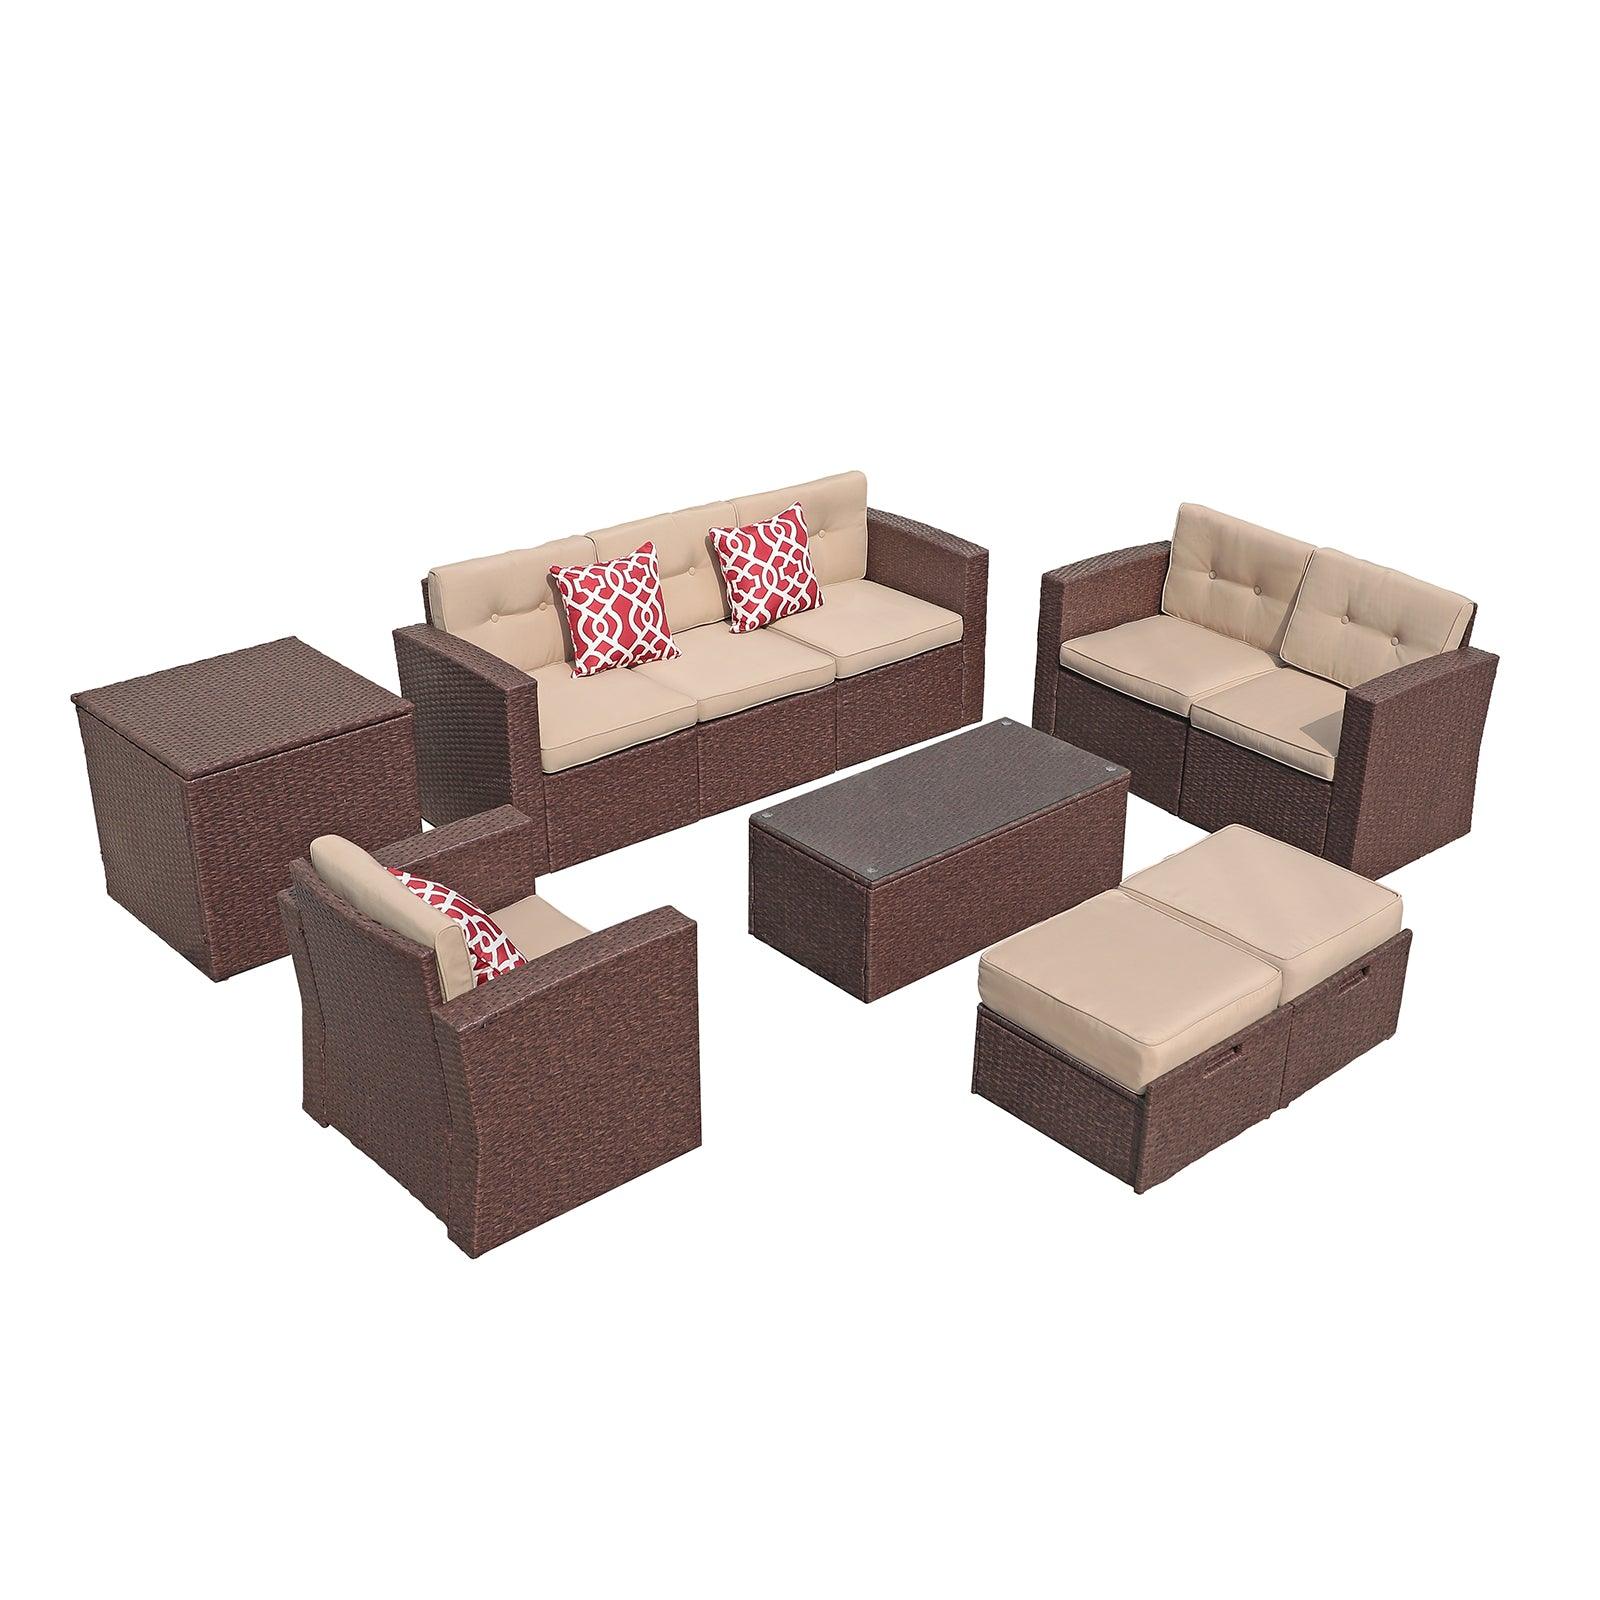 San Terraza 10-pc. Outdoor Sectional Set with Two Ottomans sale best